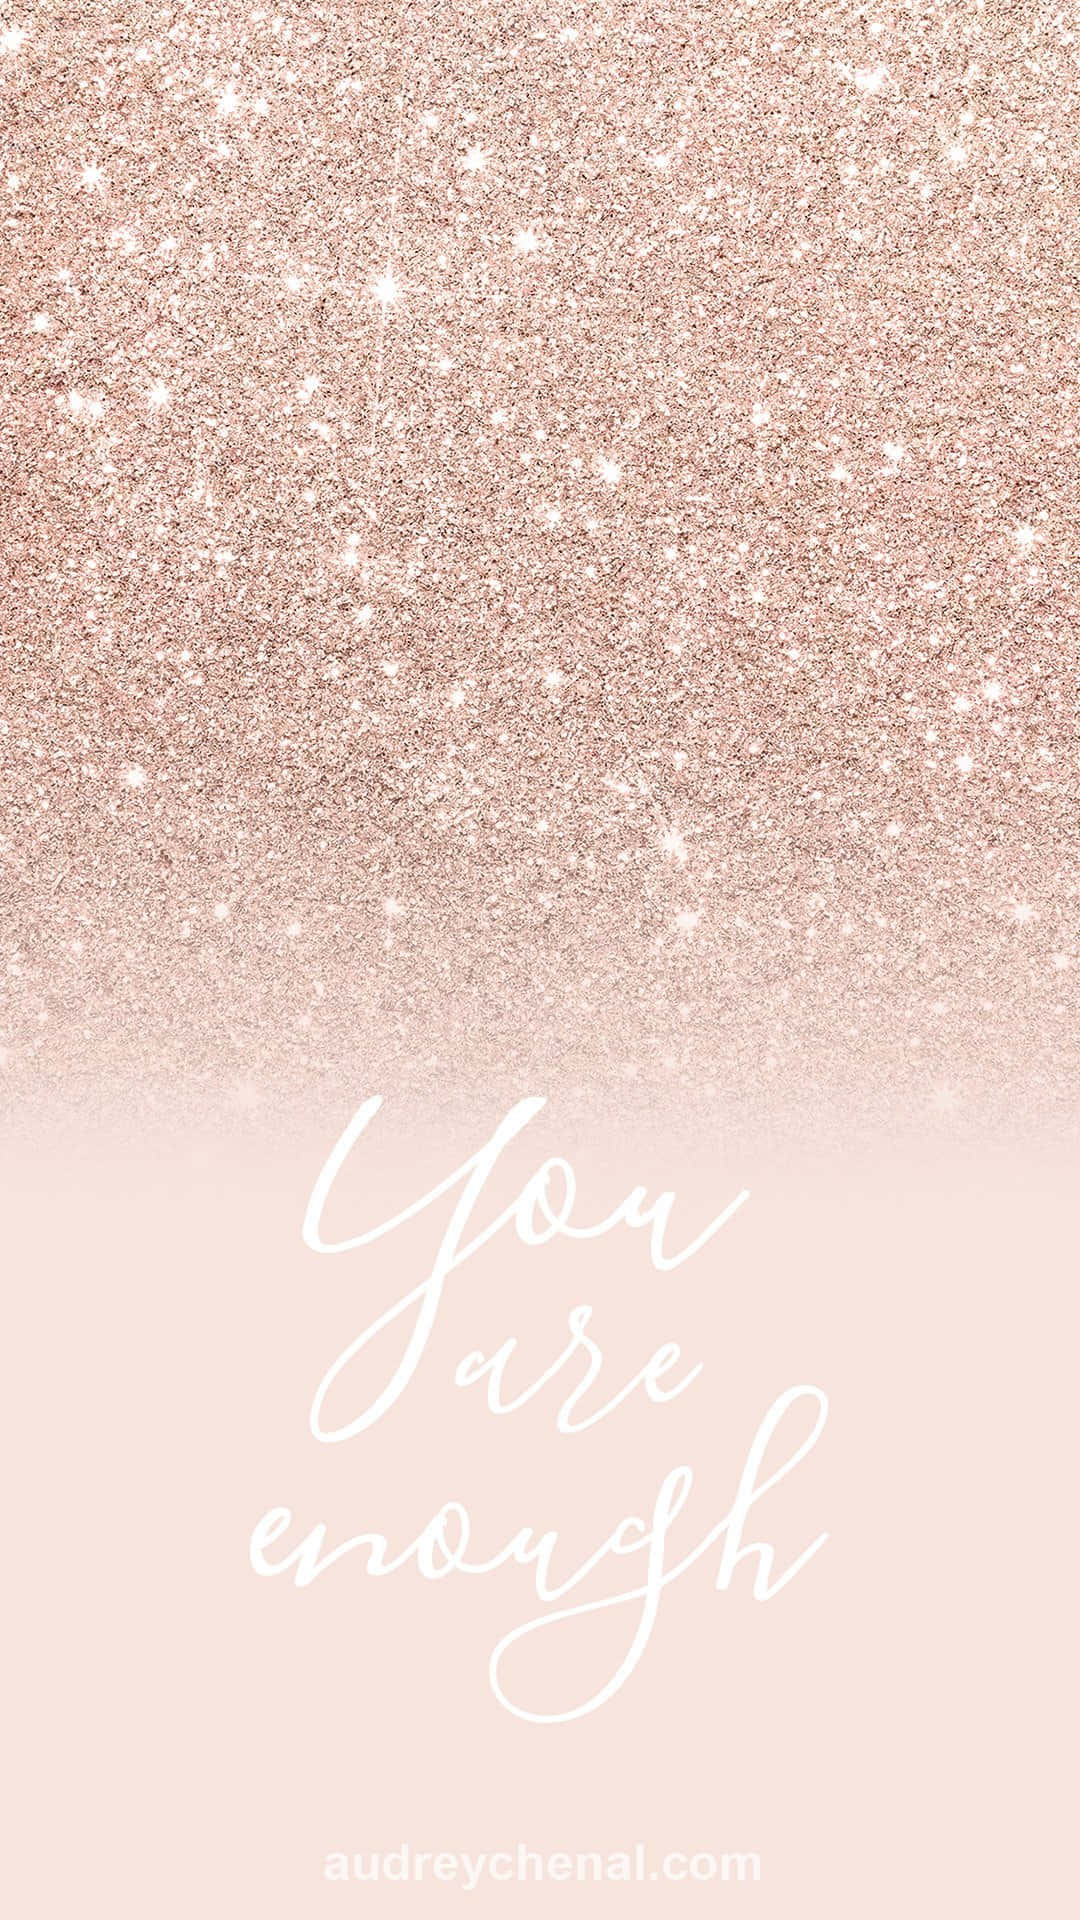 Remember, You Are Enough! Wallpaper